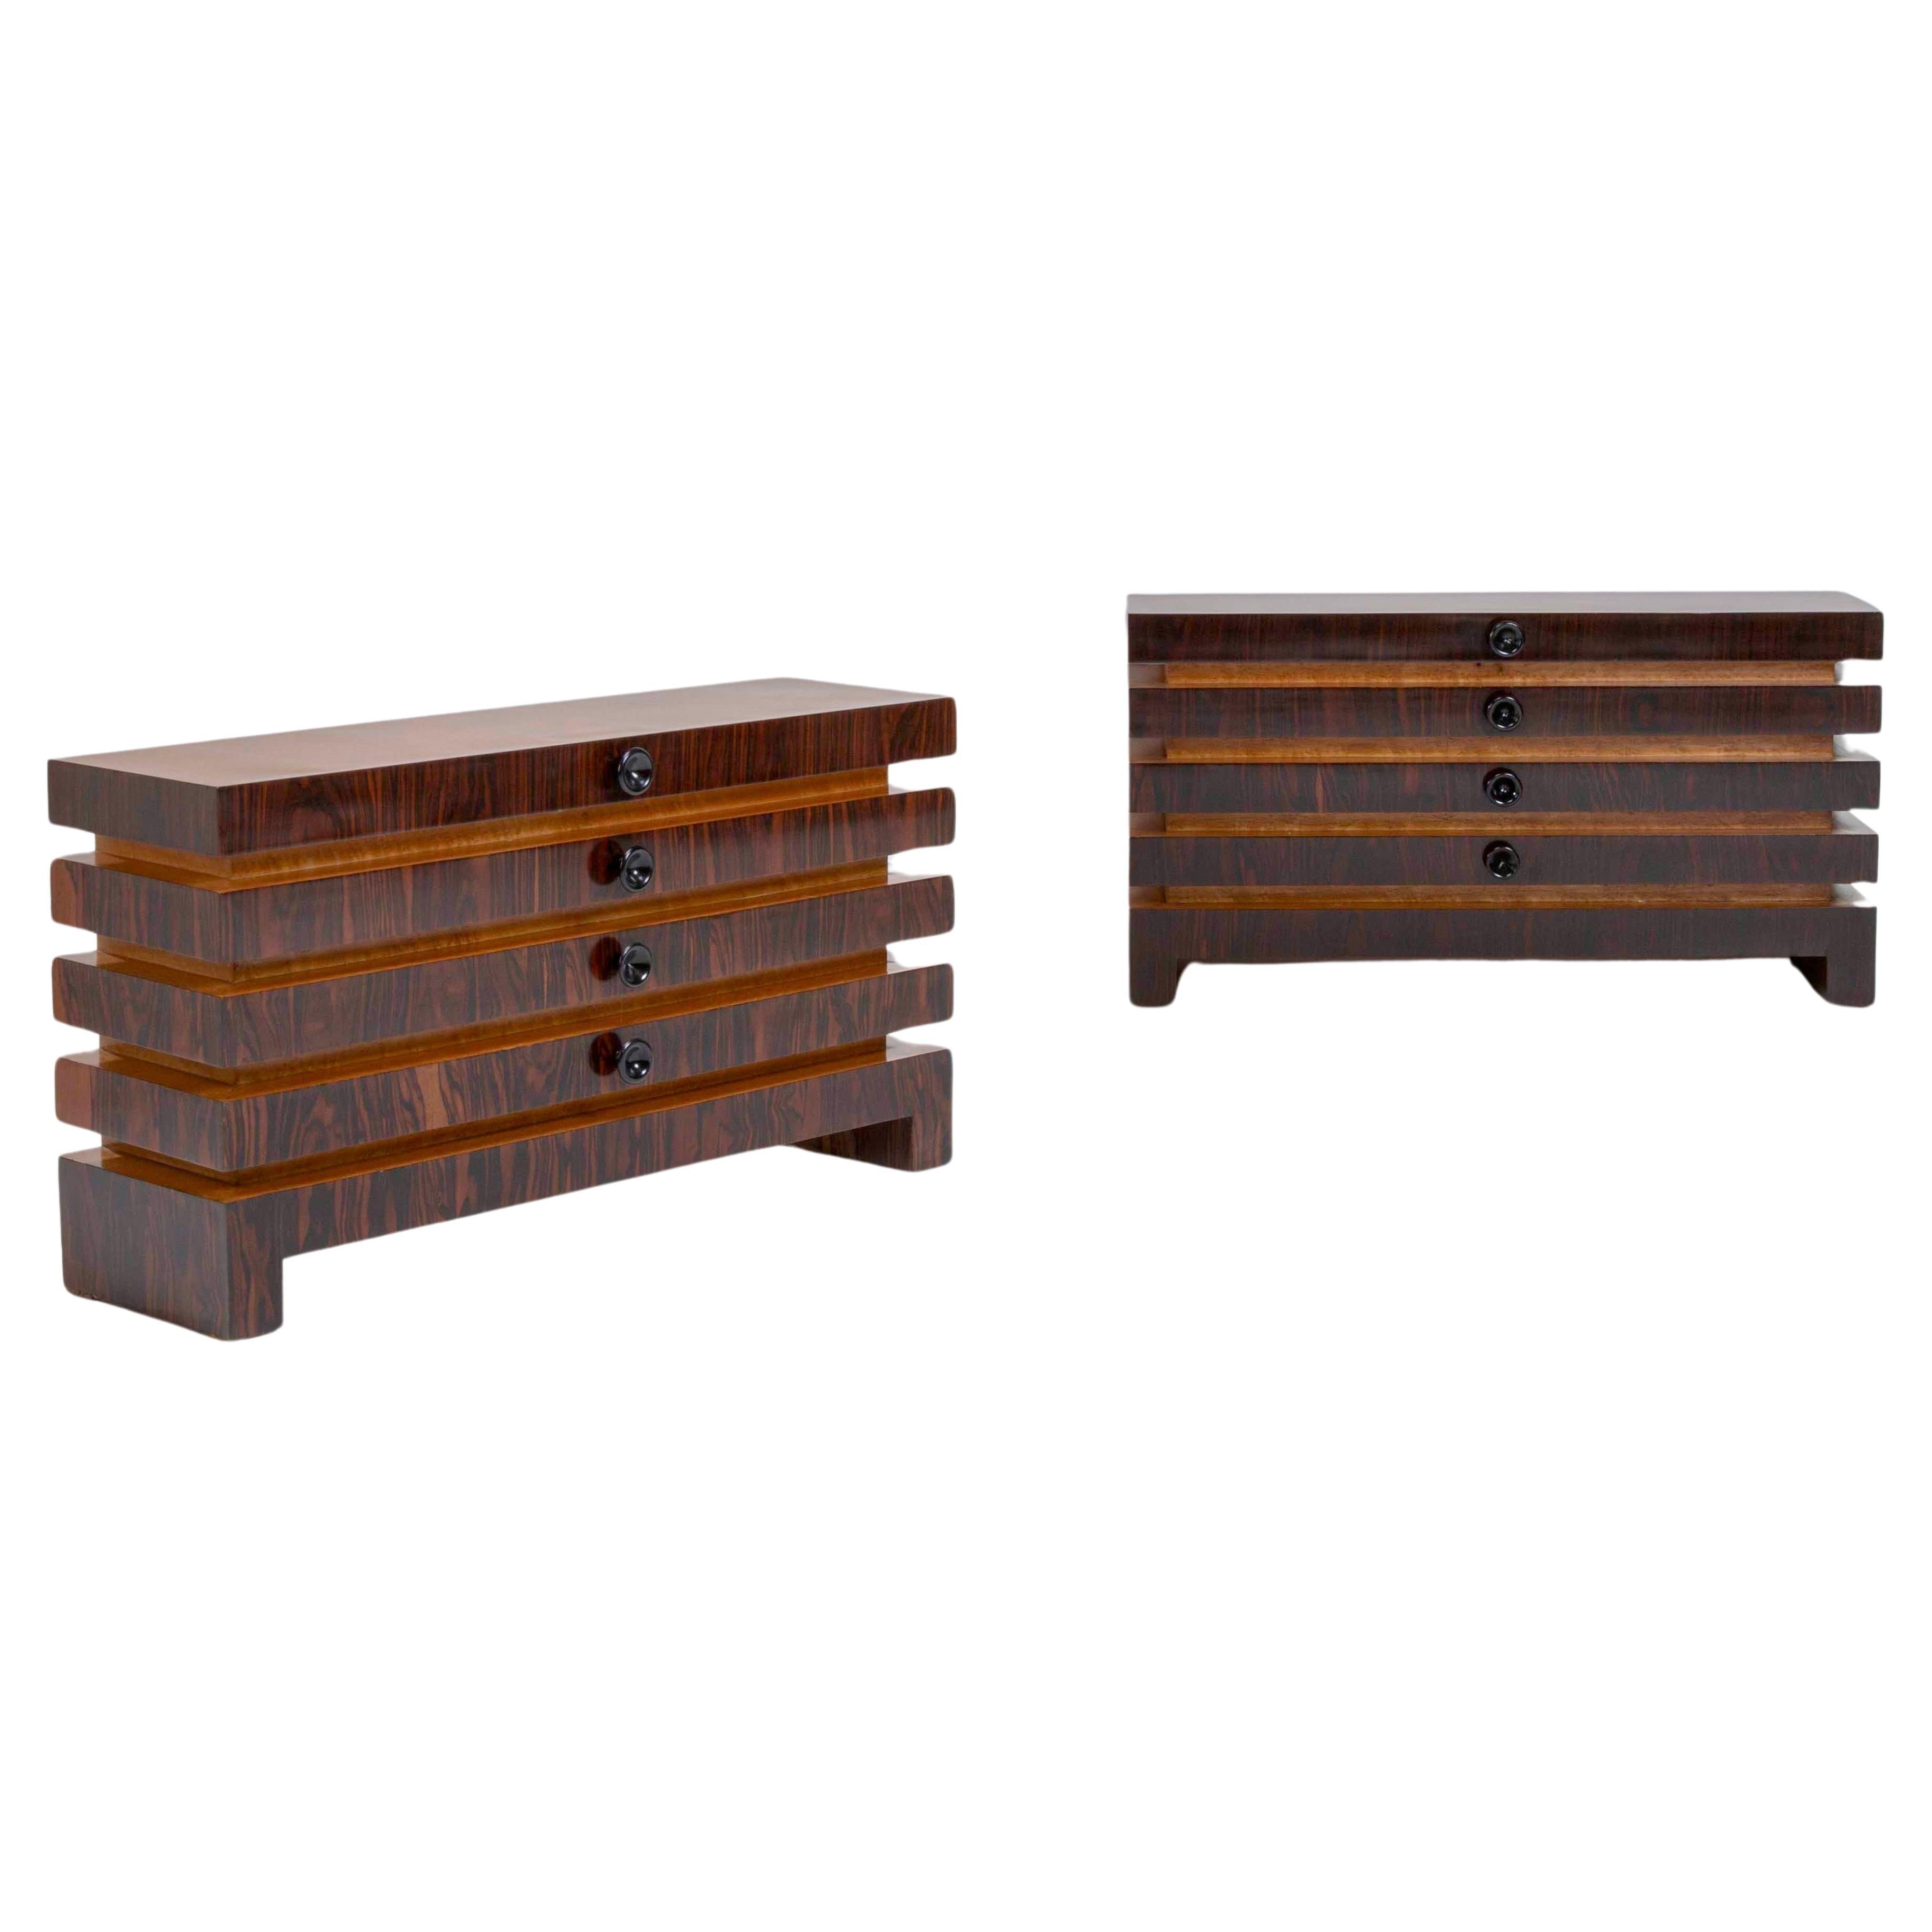 Two Magnificent Wood Consolle Mid-Century Italian Design For Sale